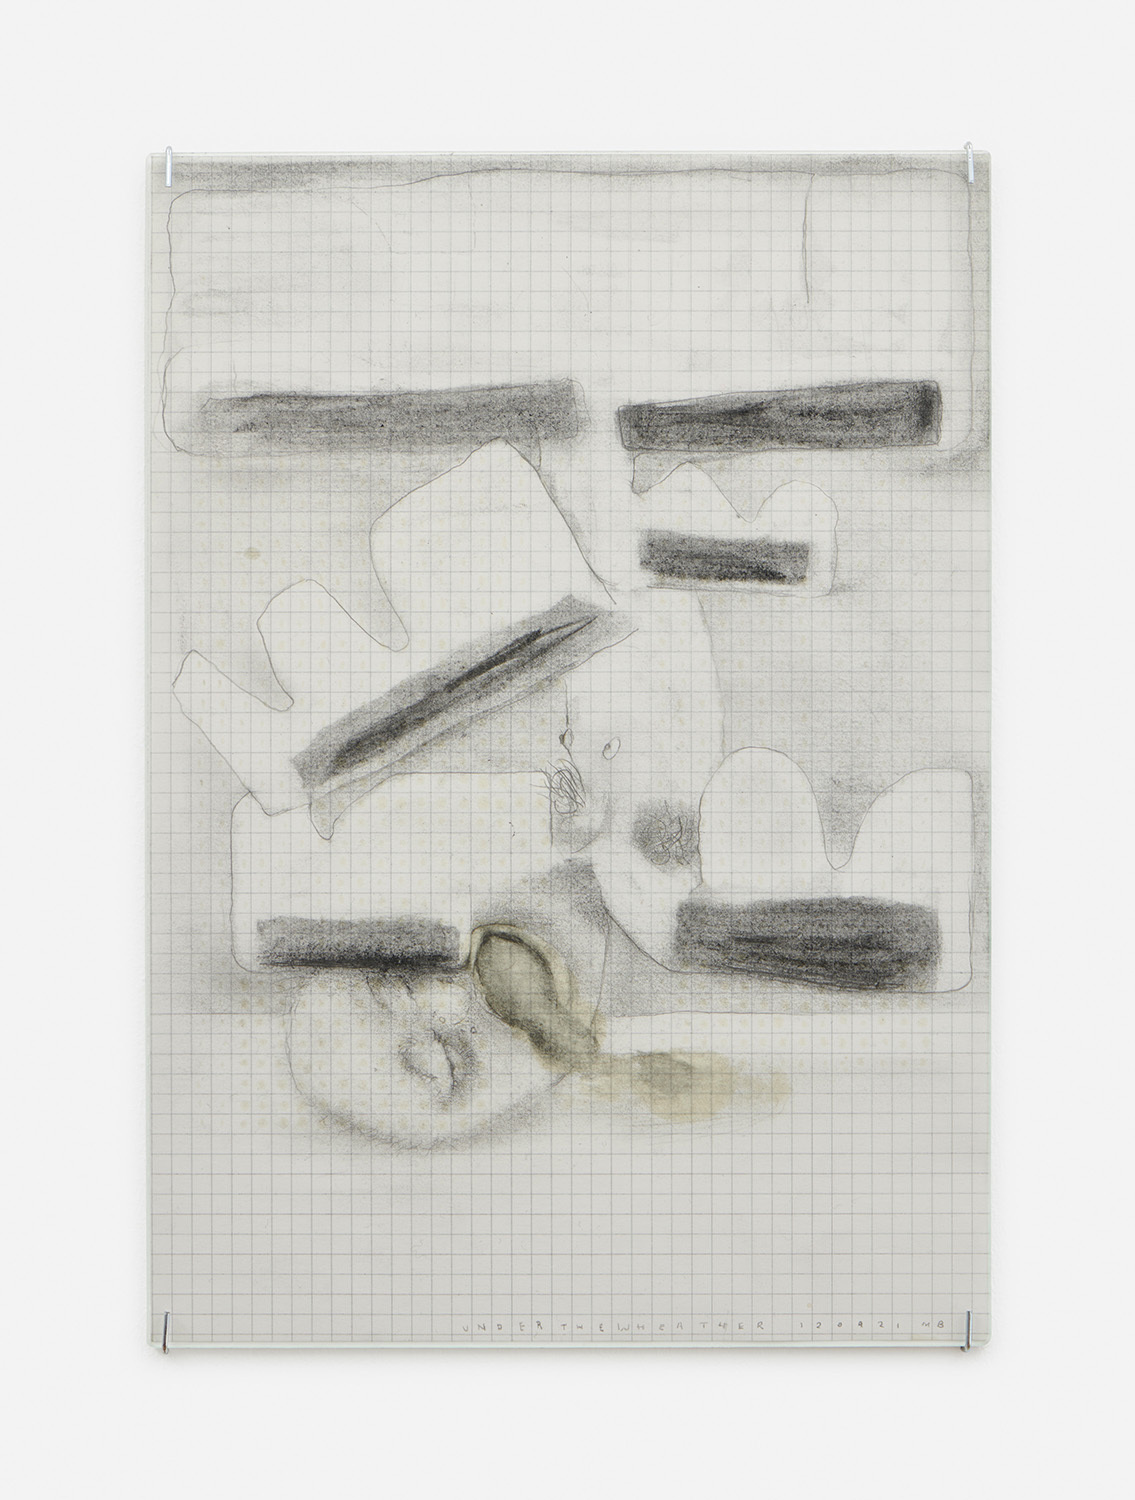 Mark Barker, Under the weather, a, 2021. Graphite, charcoal, oil and cigarette ash on paper, 29.7 x 21 cm